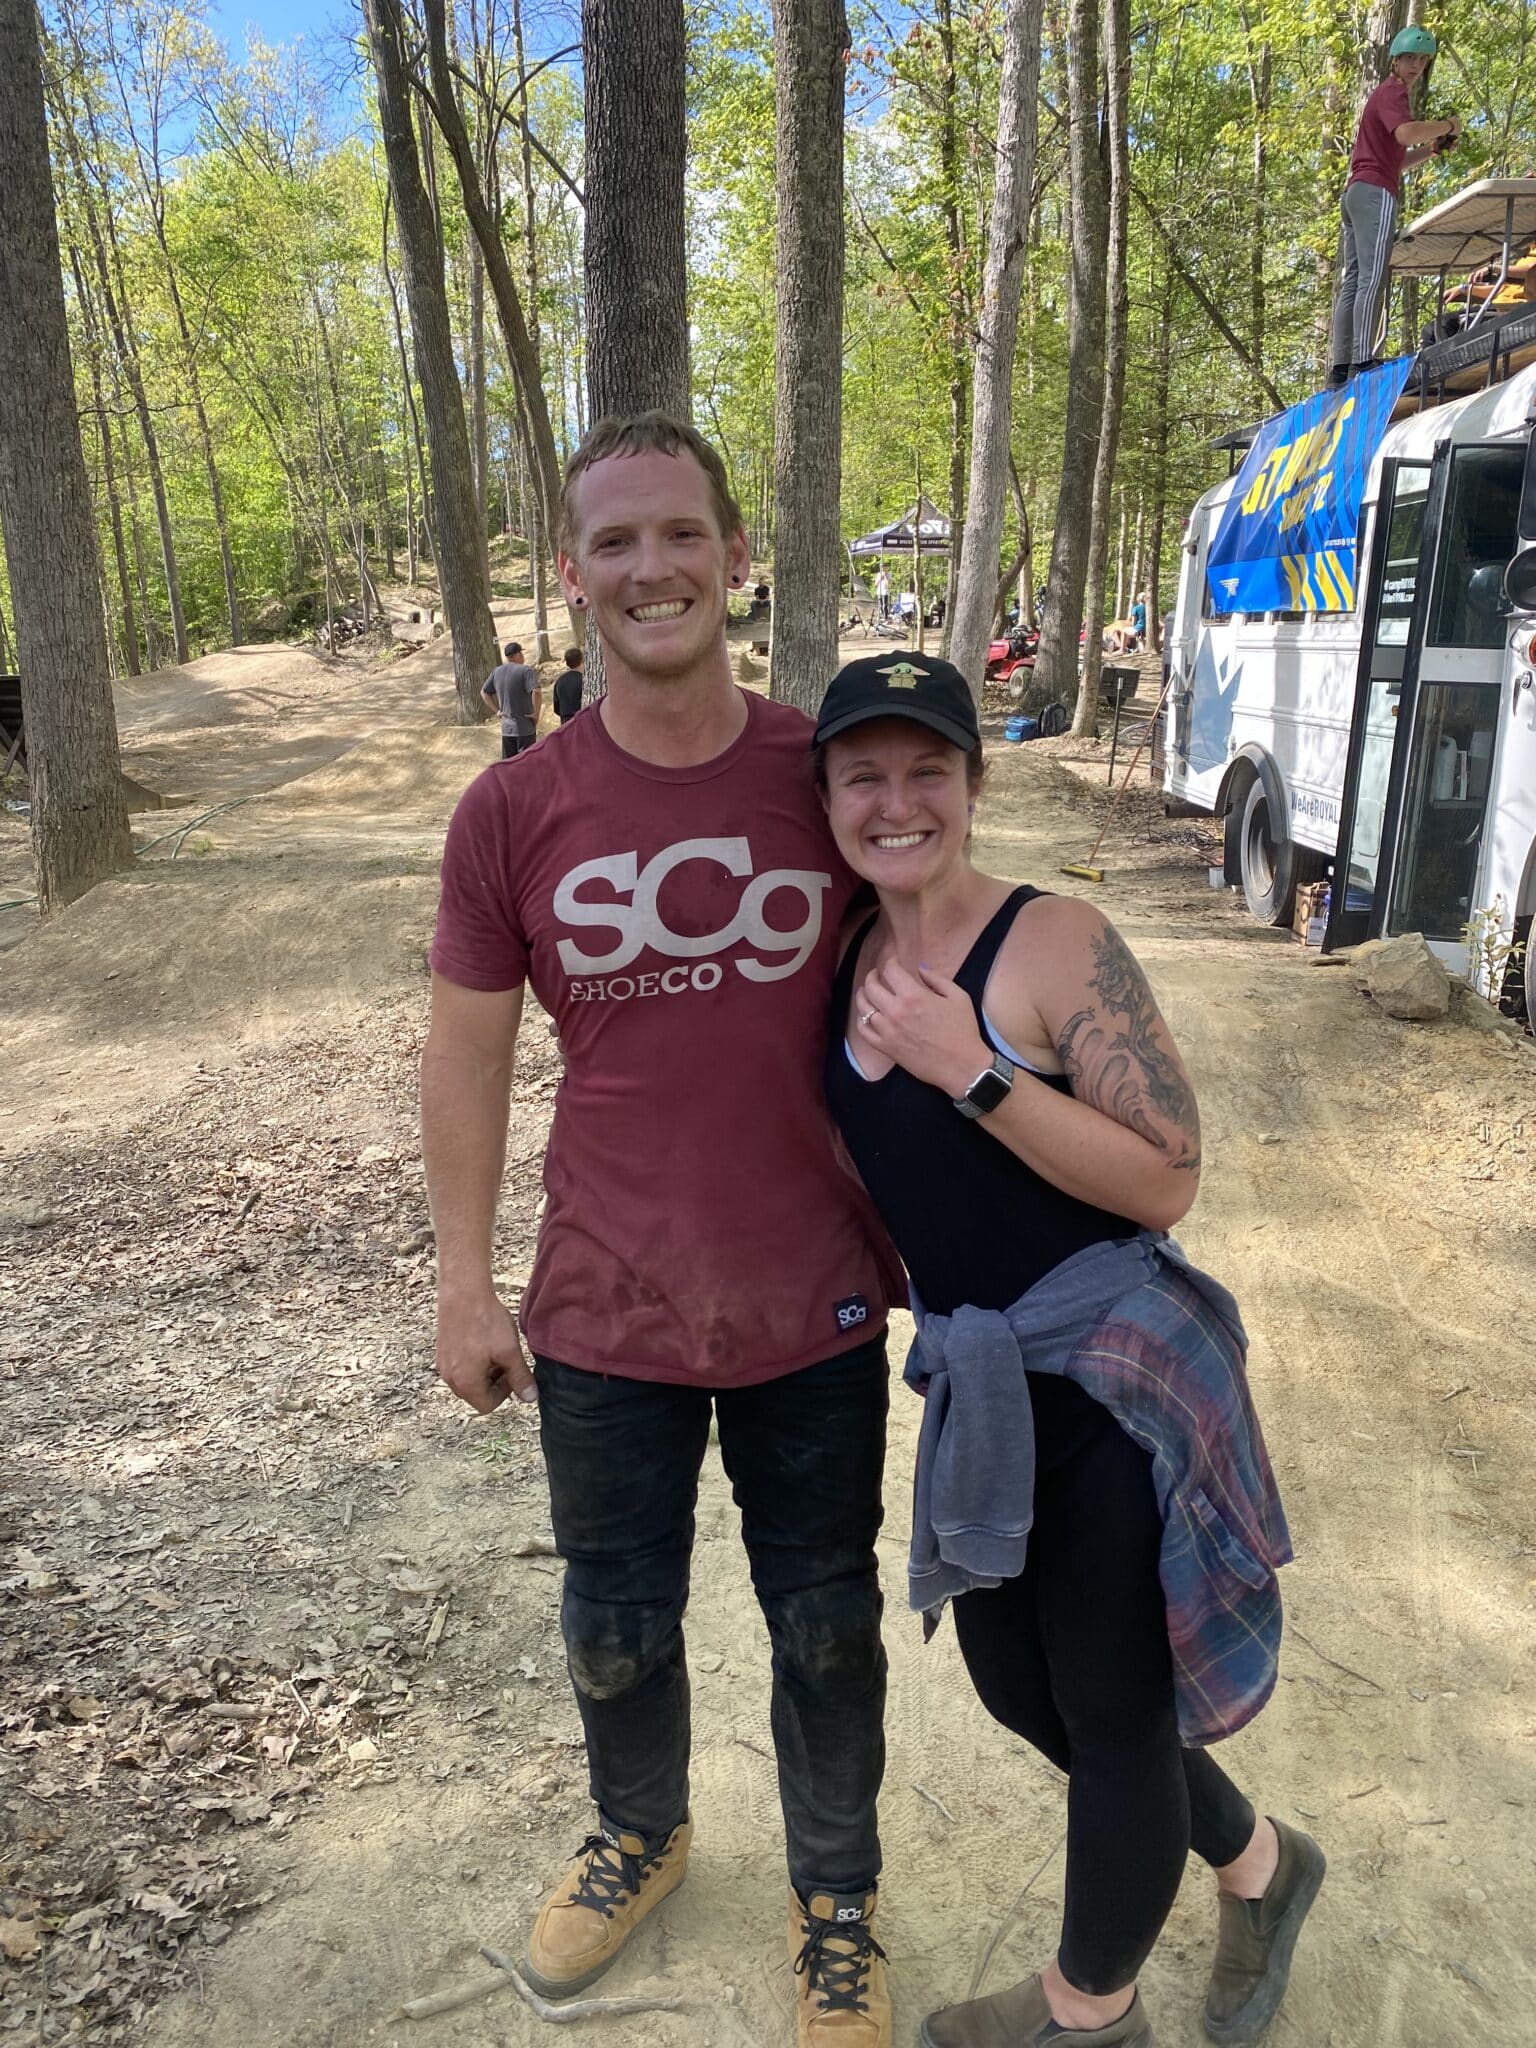 couple recently engaged stand together for picture in woods while smiling